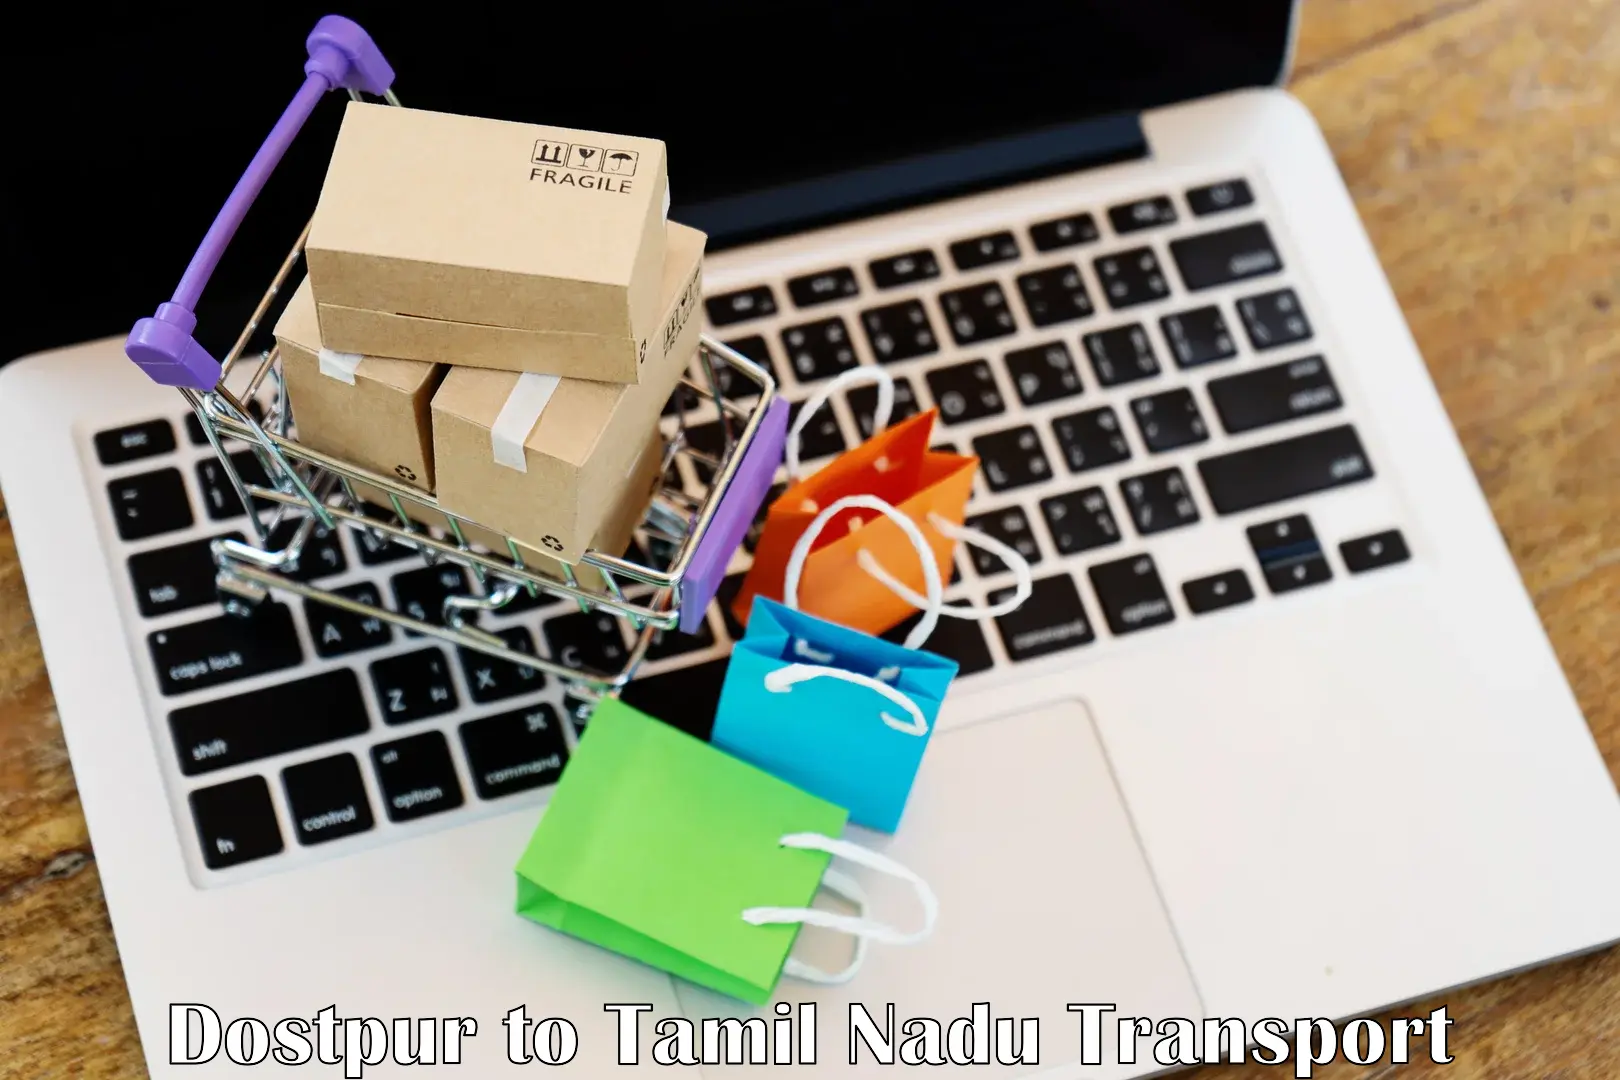 Parcel transport services Dostpur to Muthukulathur